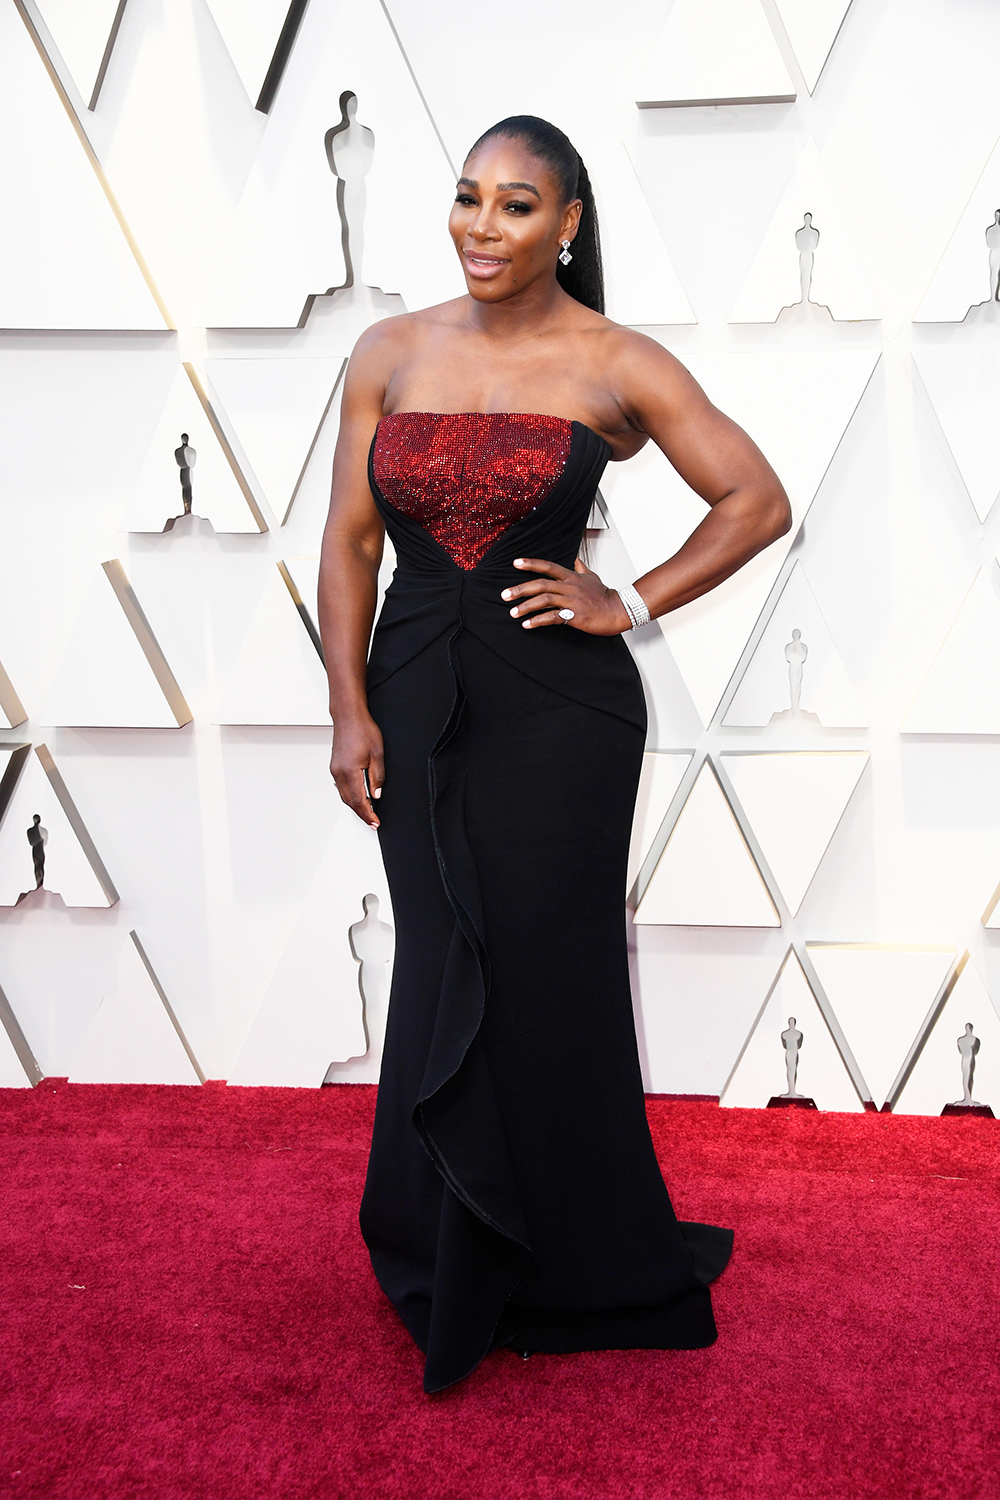 HOLLYWOOD, CALIFORNIA - FEBRUARY 24: Serena Williams attends the 91st Annual Academy Awards at Hollywood and Highland on February 24, 2019 in Hollywood, California. (Photo by Frazer Harrison/Getty Images)